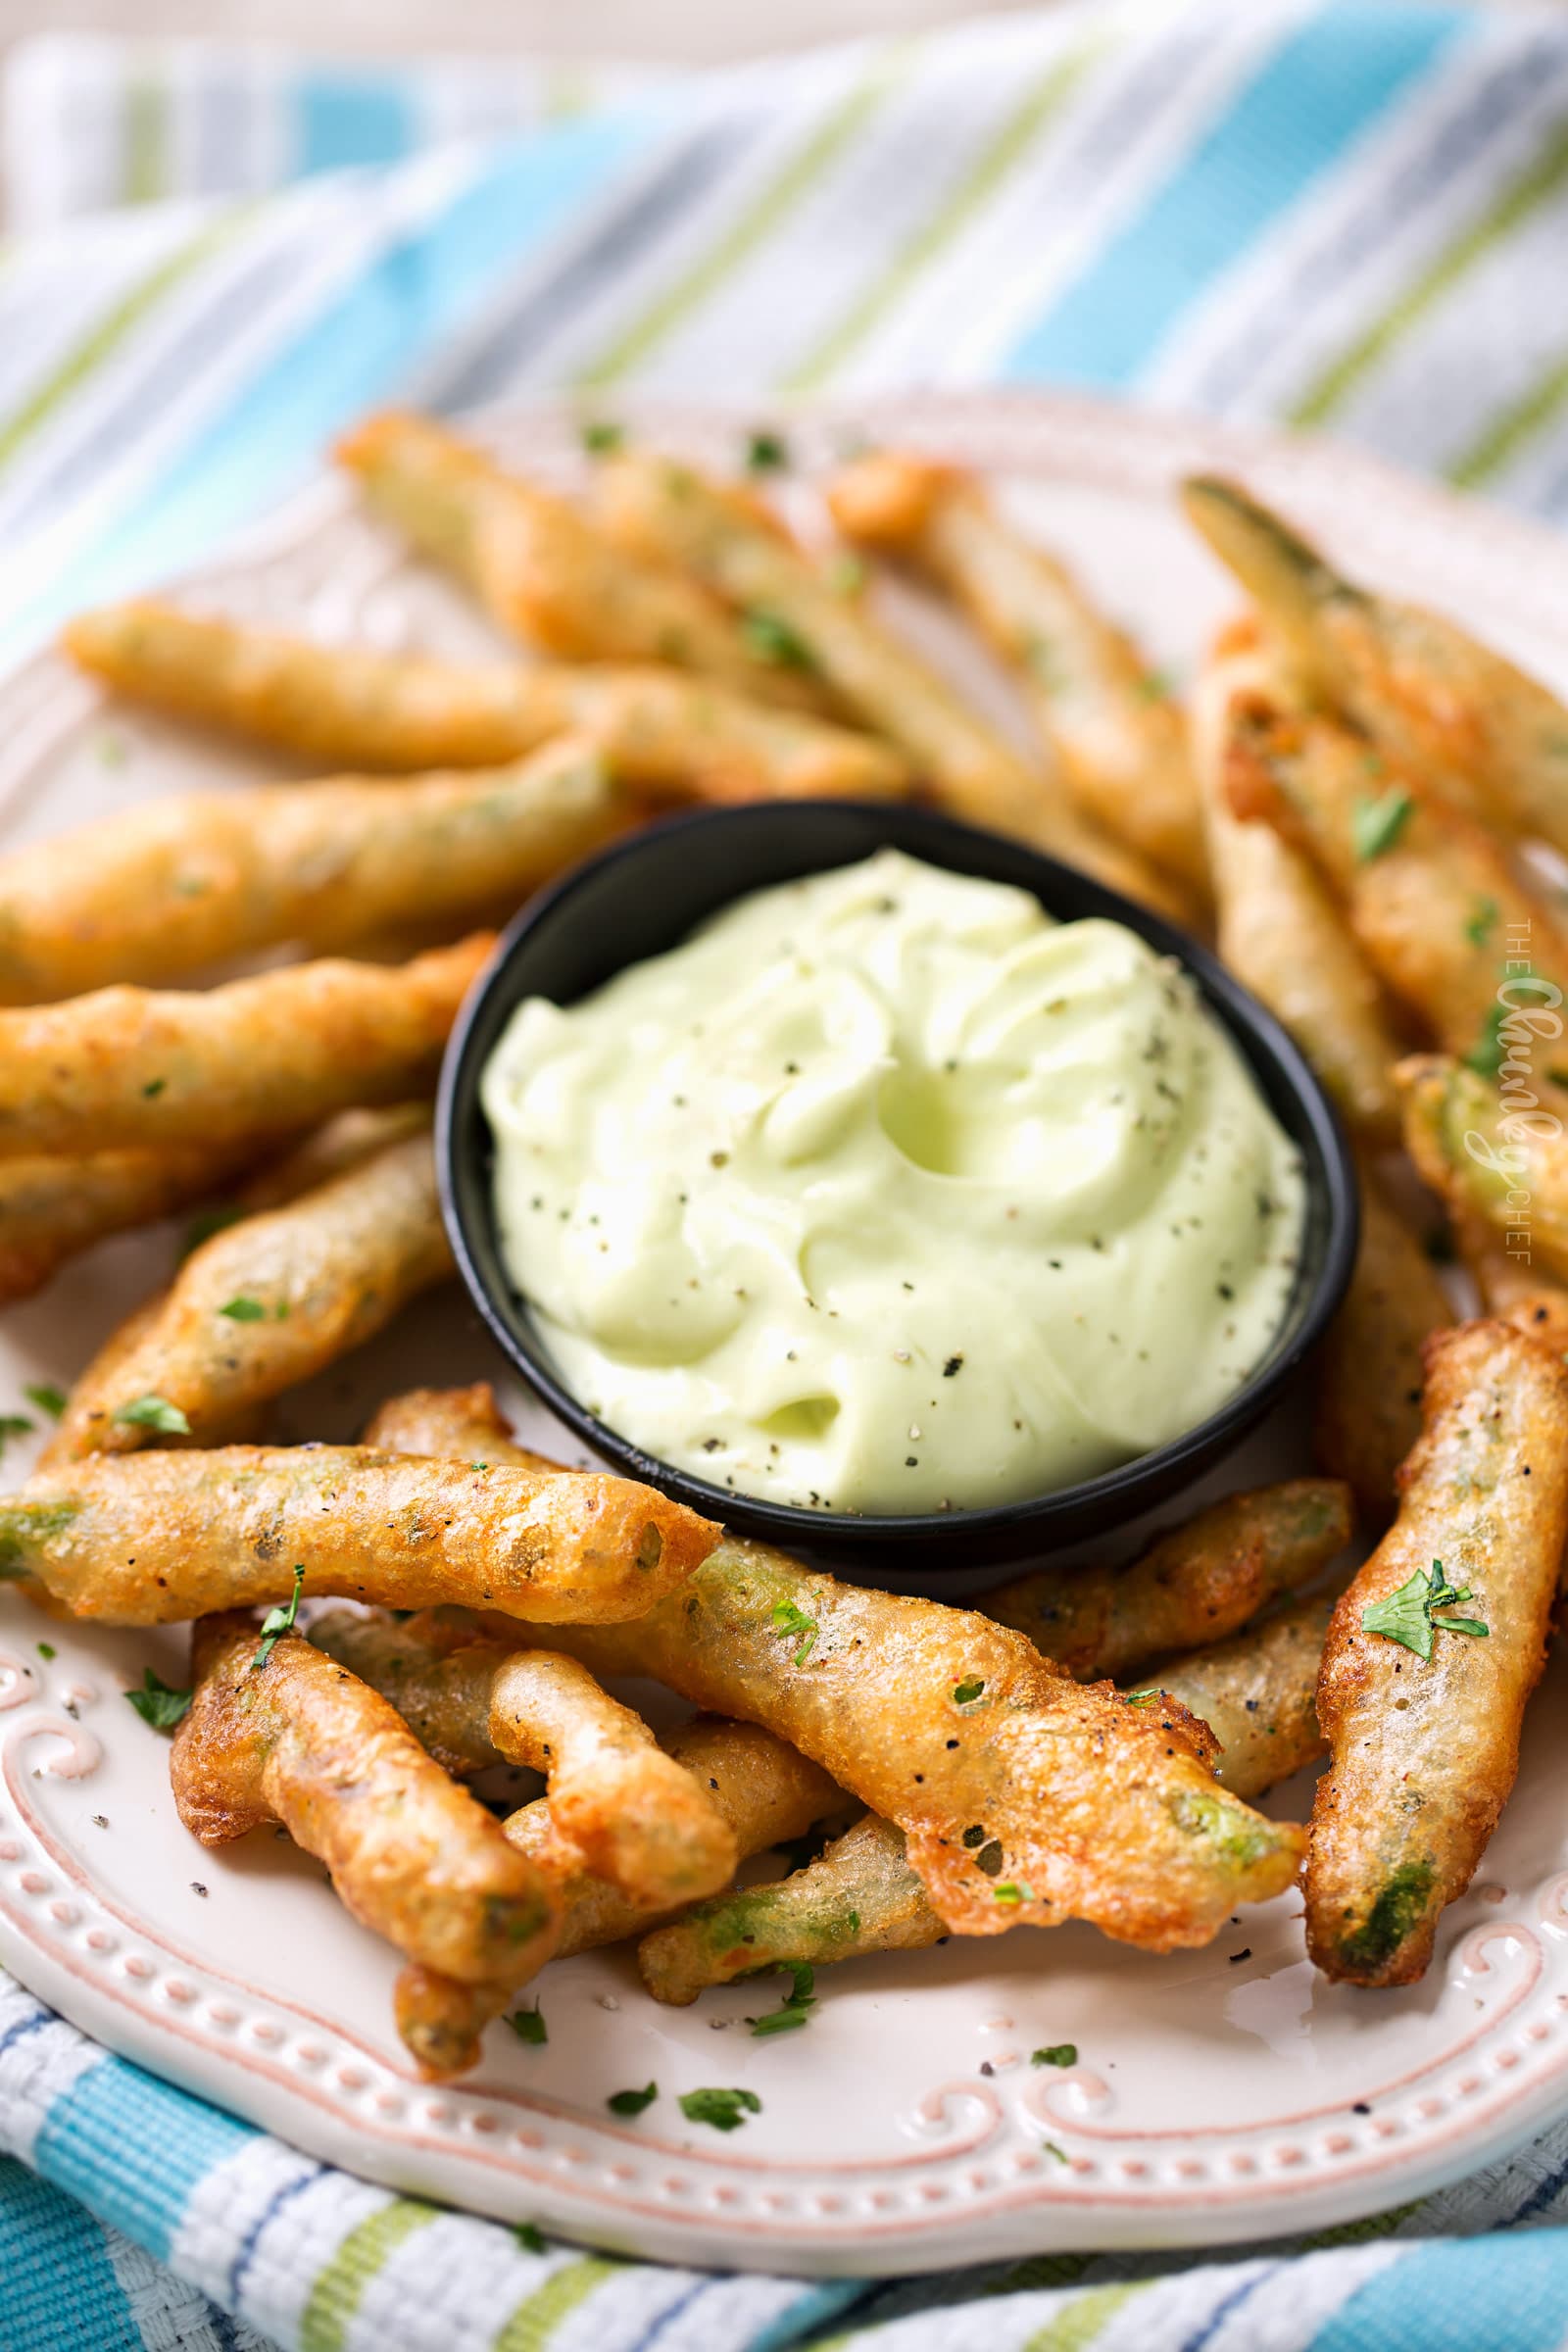 Beer Battered Fried Green Beans | The perfect appetizer or snack food, these crispy green bean "fries" are tender, crispy, yet surprisingly light thanks to the beer batter!  Dipped in creamy ranch or wasabi mayo, they're a crowd-pleaser! | The Chunky Chef | #partyfood #appetizer #greenbeans #friedgreenbeans #greenbeanfries #beerbattered